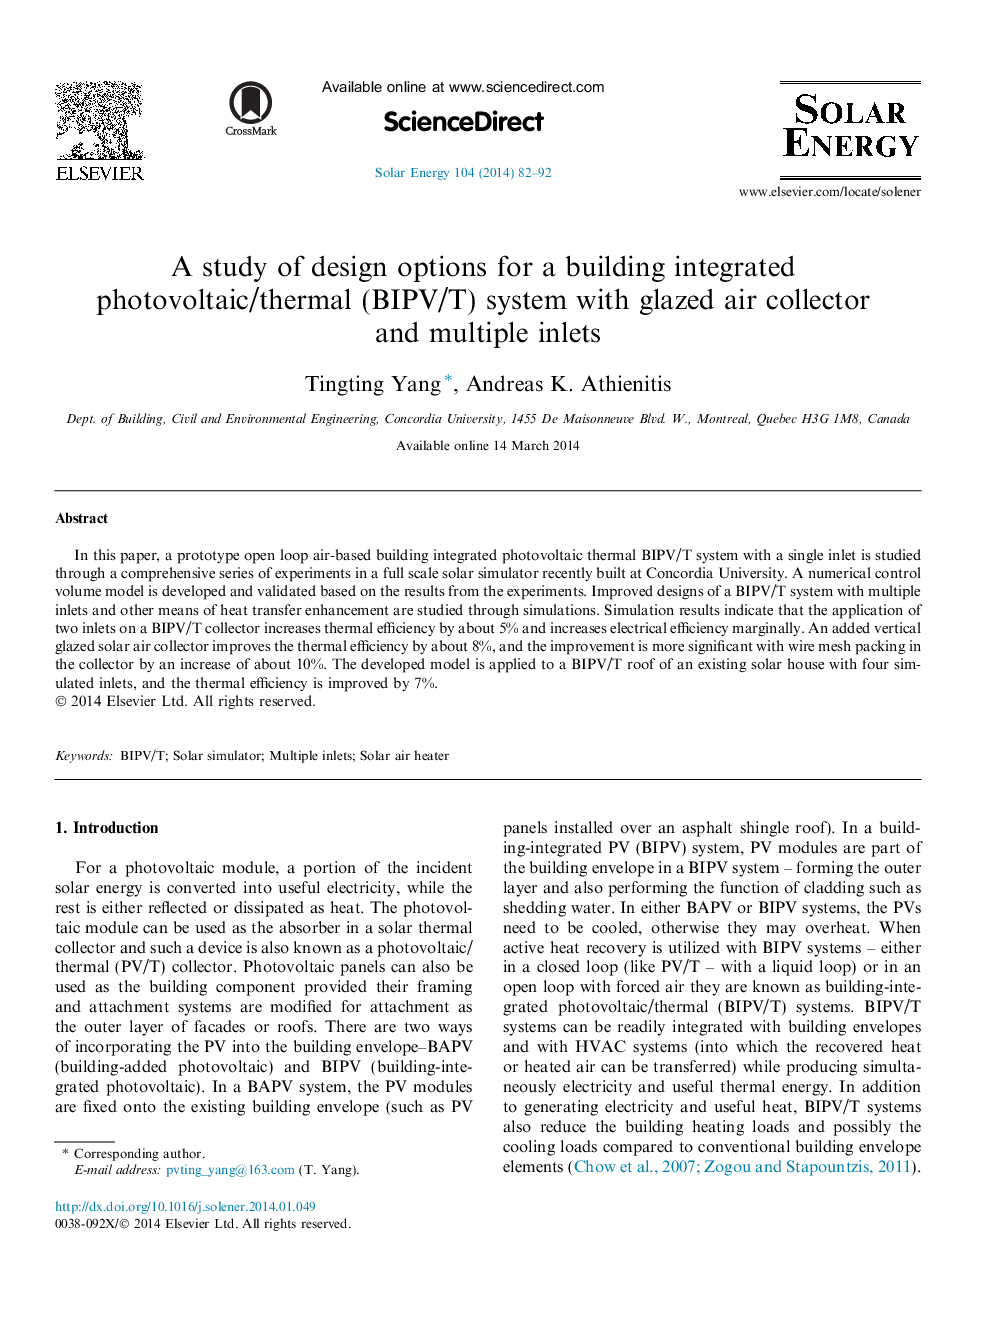 A study of design options for a building integrated photovoltaic/thermal (BIPV/T) system with glazed air collector and multiple inlets